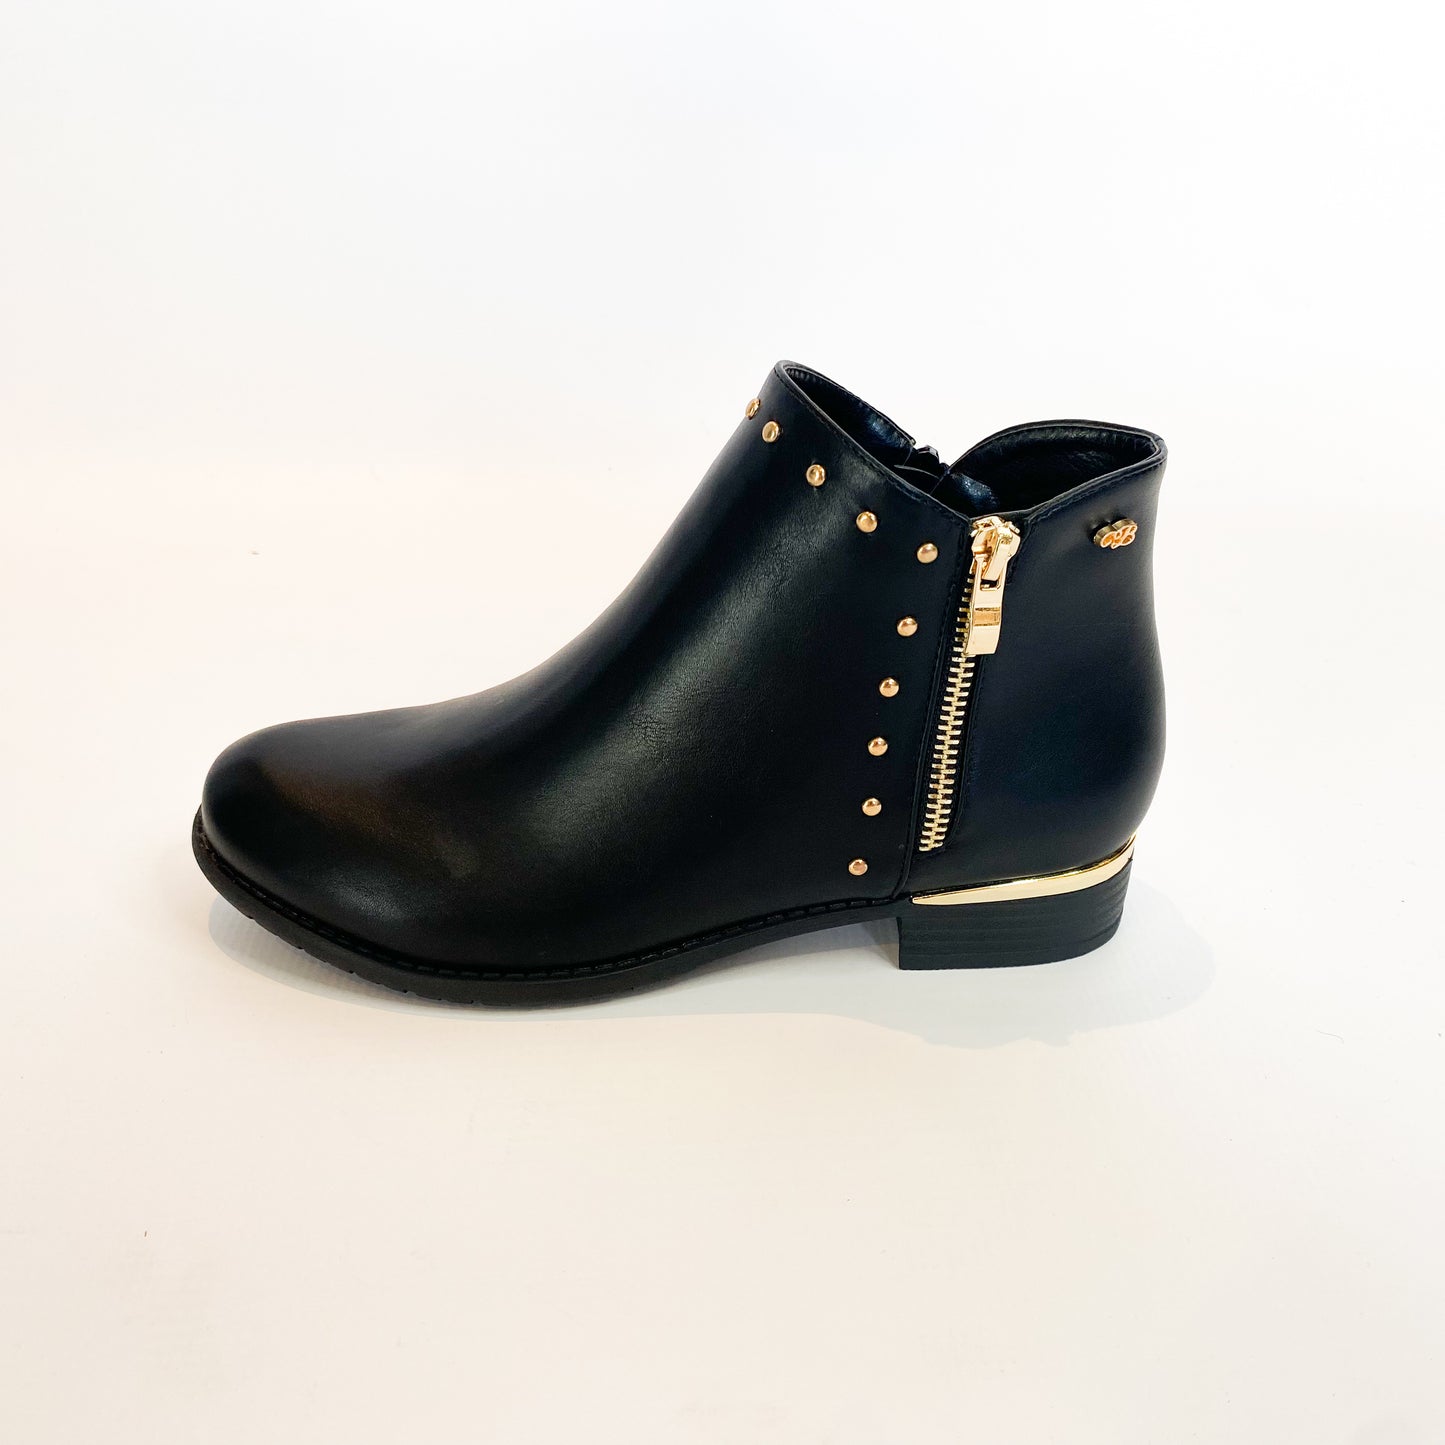 Miss Black, black and gold stud ankle boot